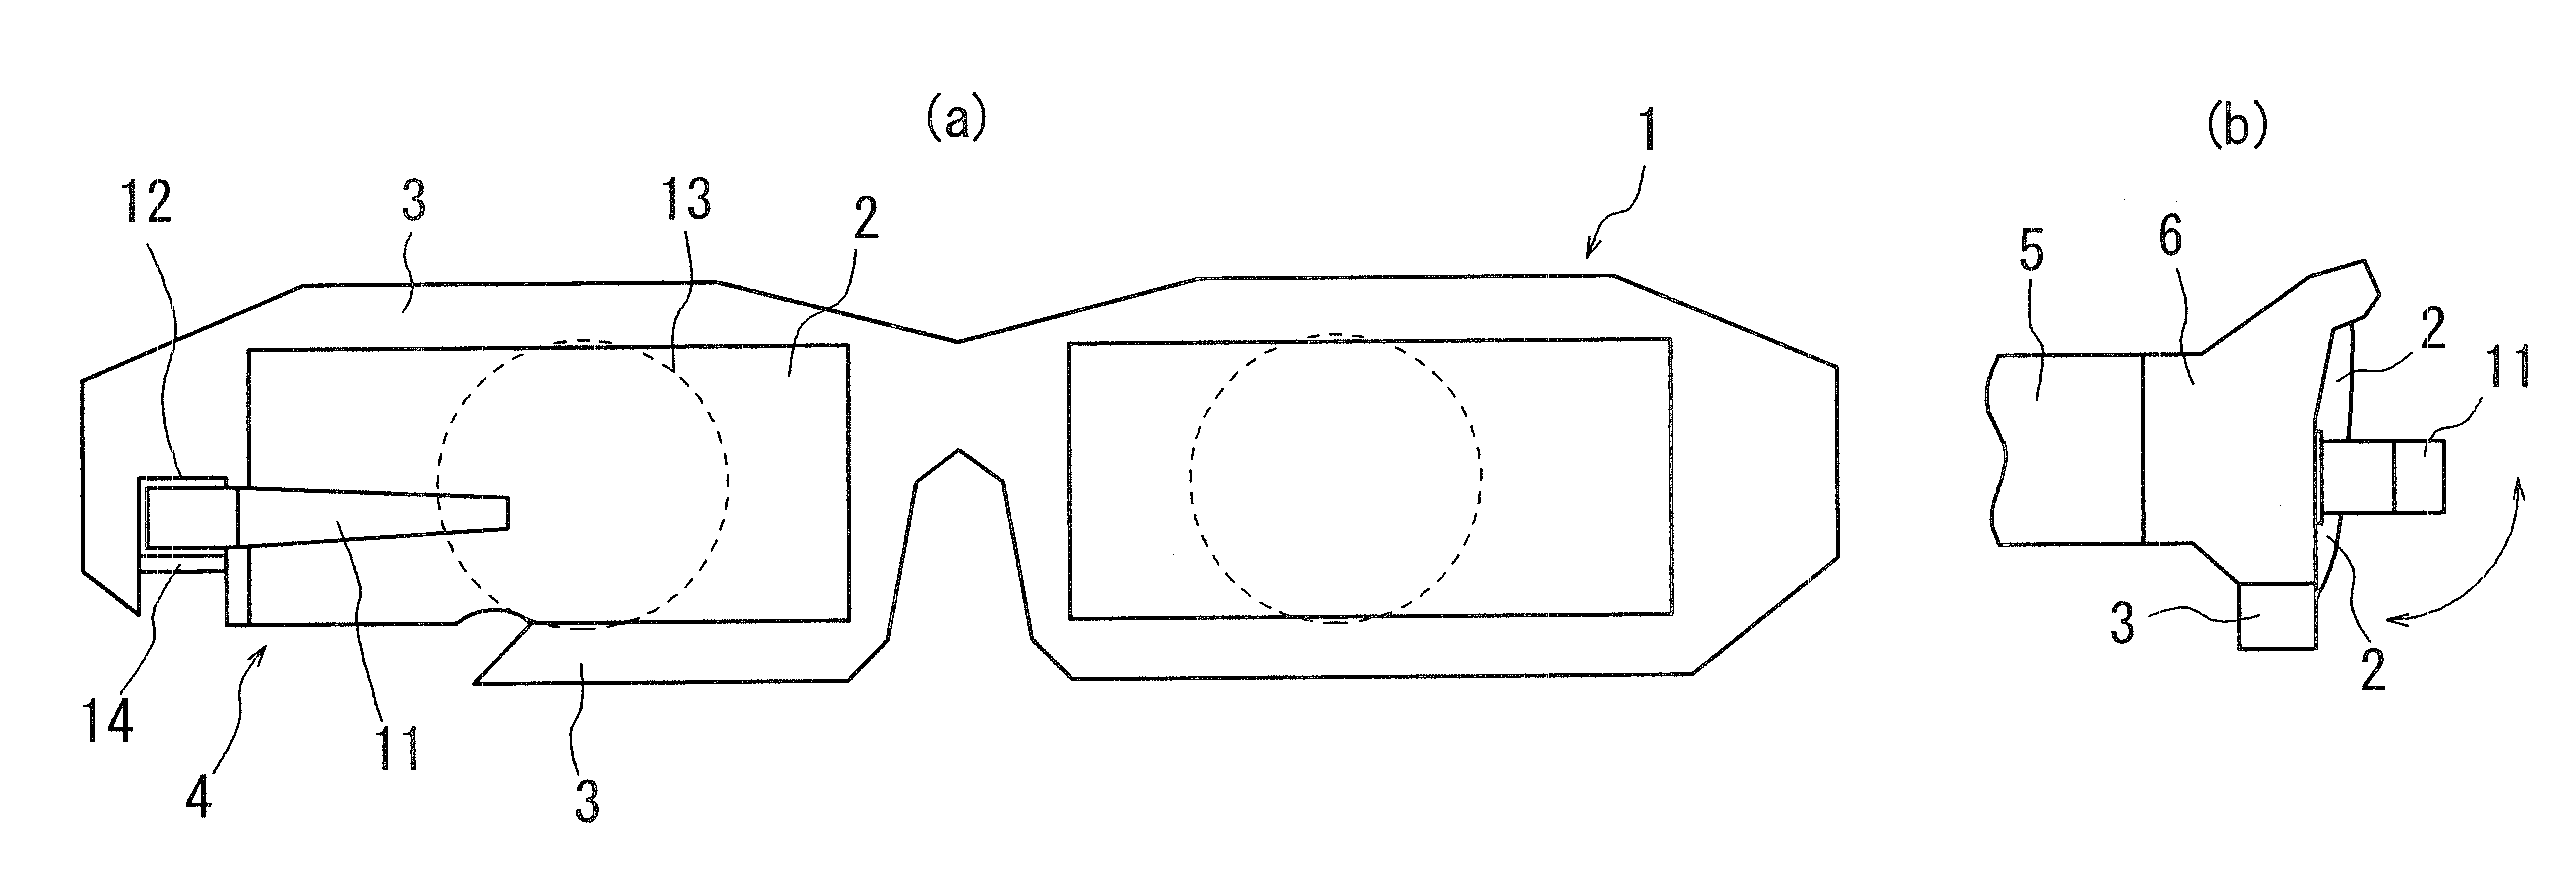 Eyeglass-type image display device and an eyeglass frame used therefor